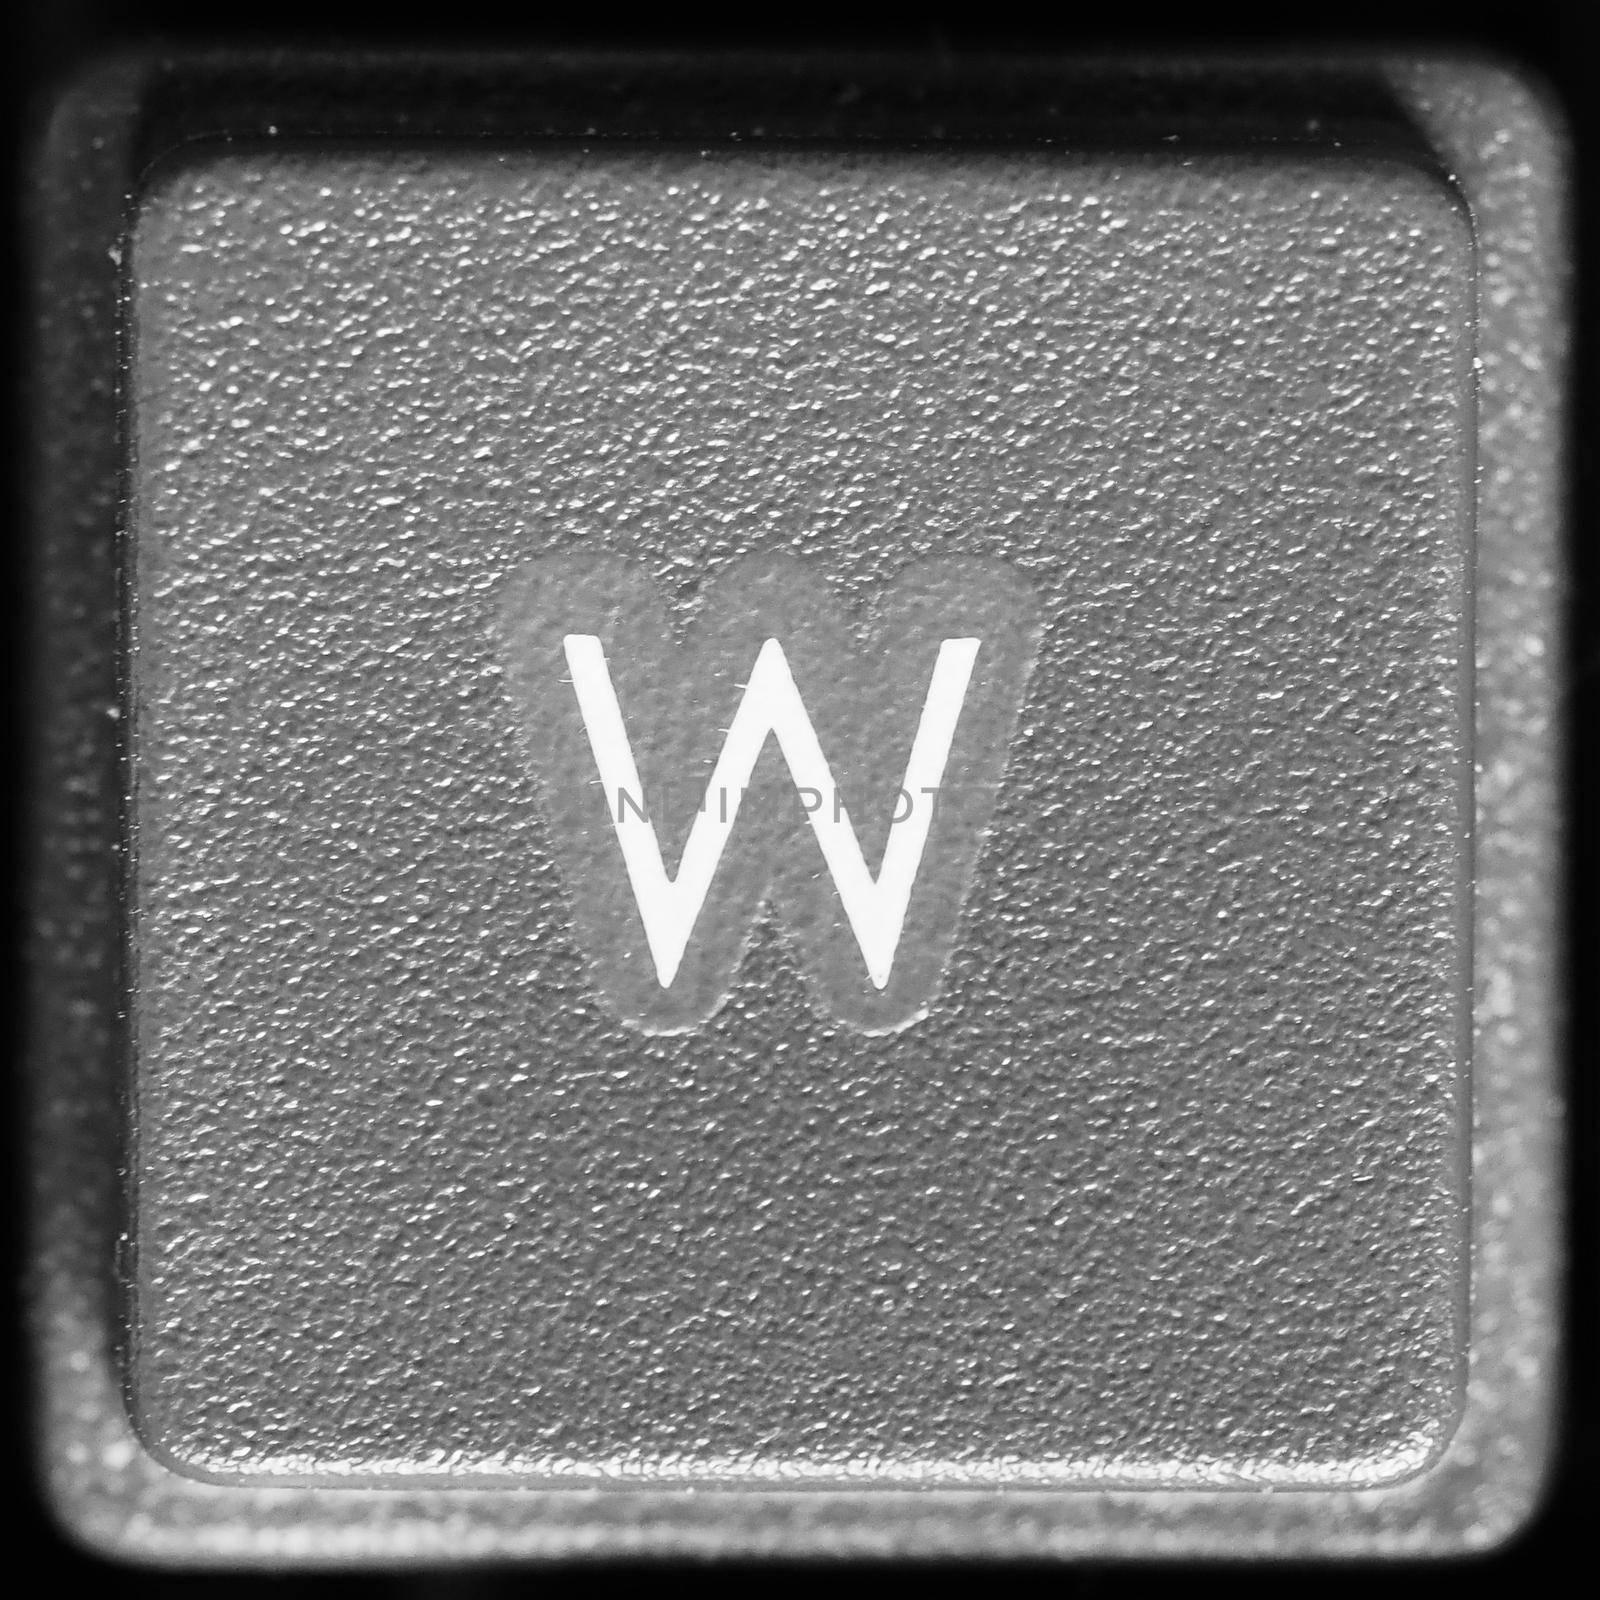 Letter W on computer keyboard by claudiodivizia